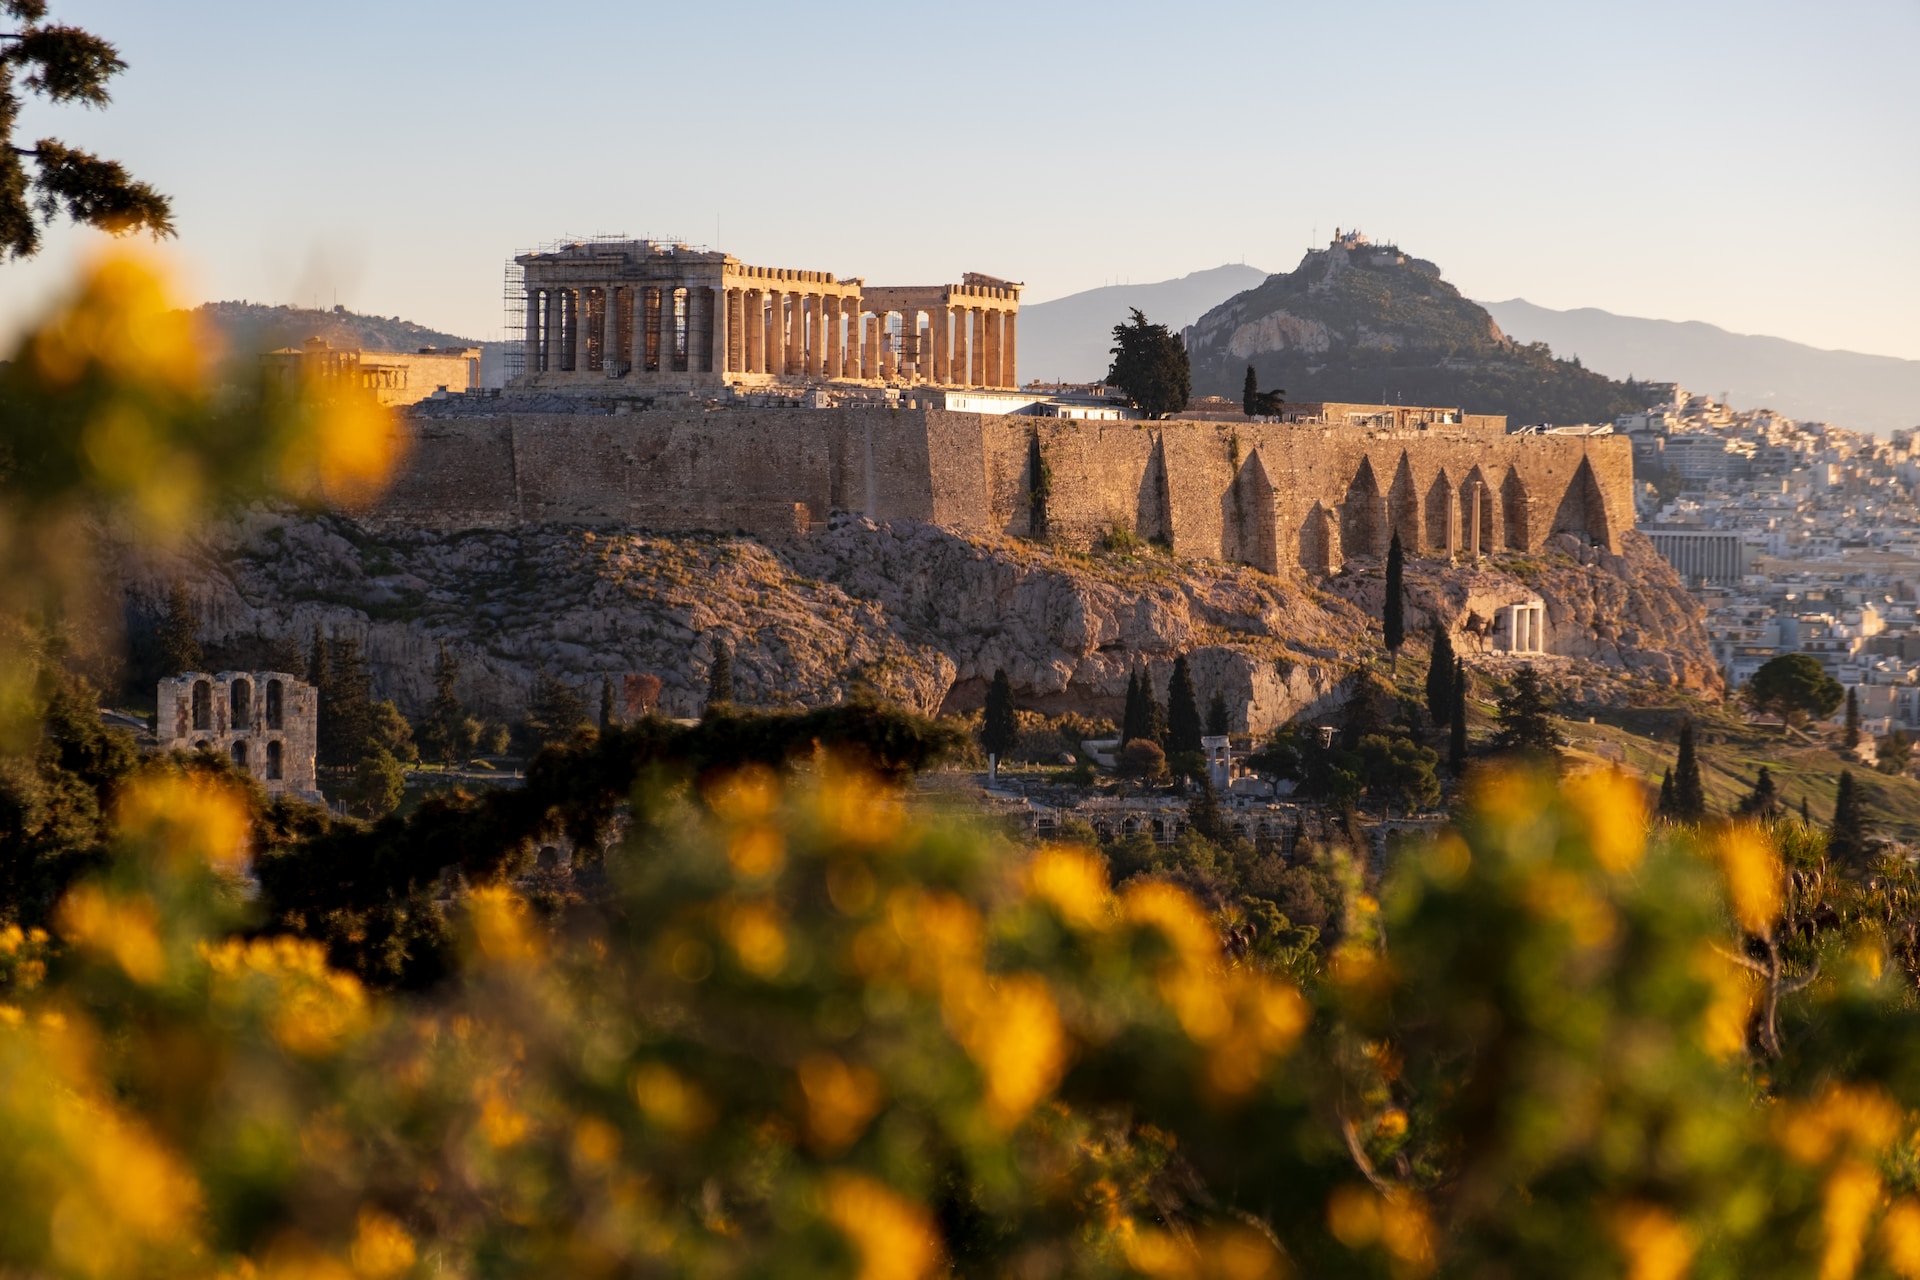 The Parthenon is an amazing location for an unforgettable engagement as well.